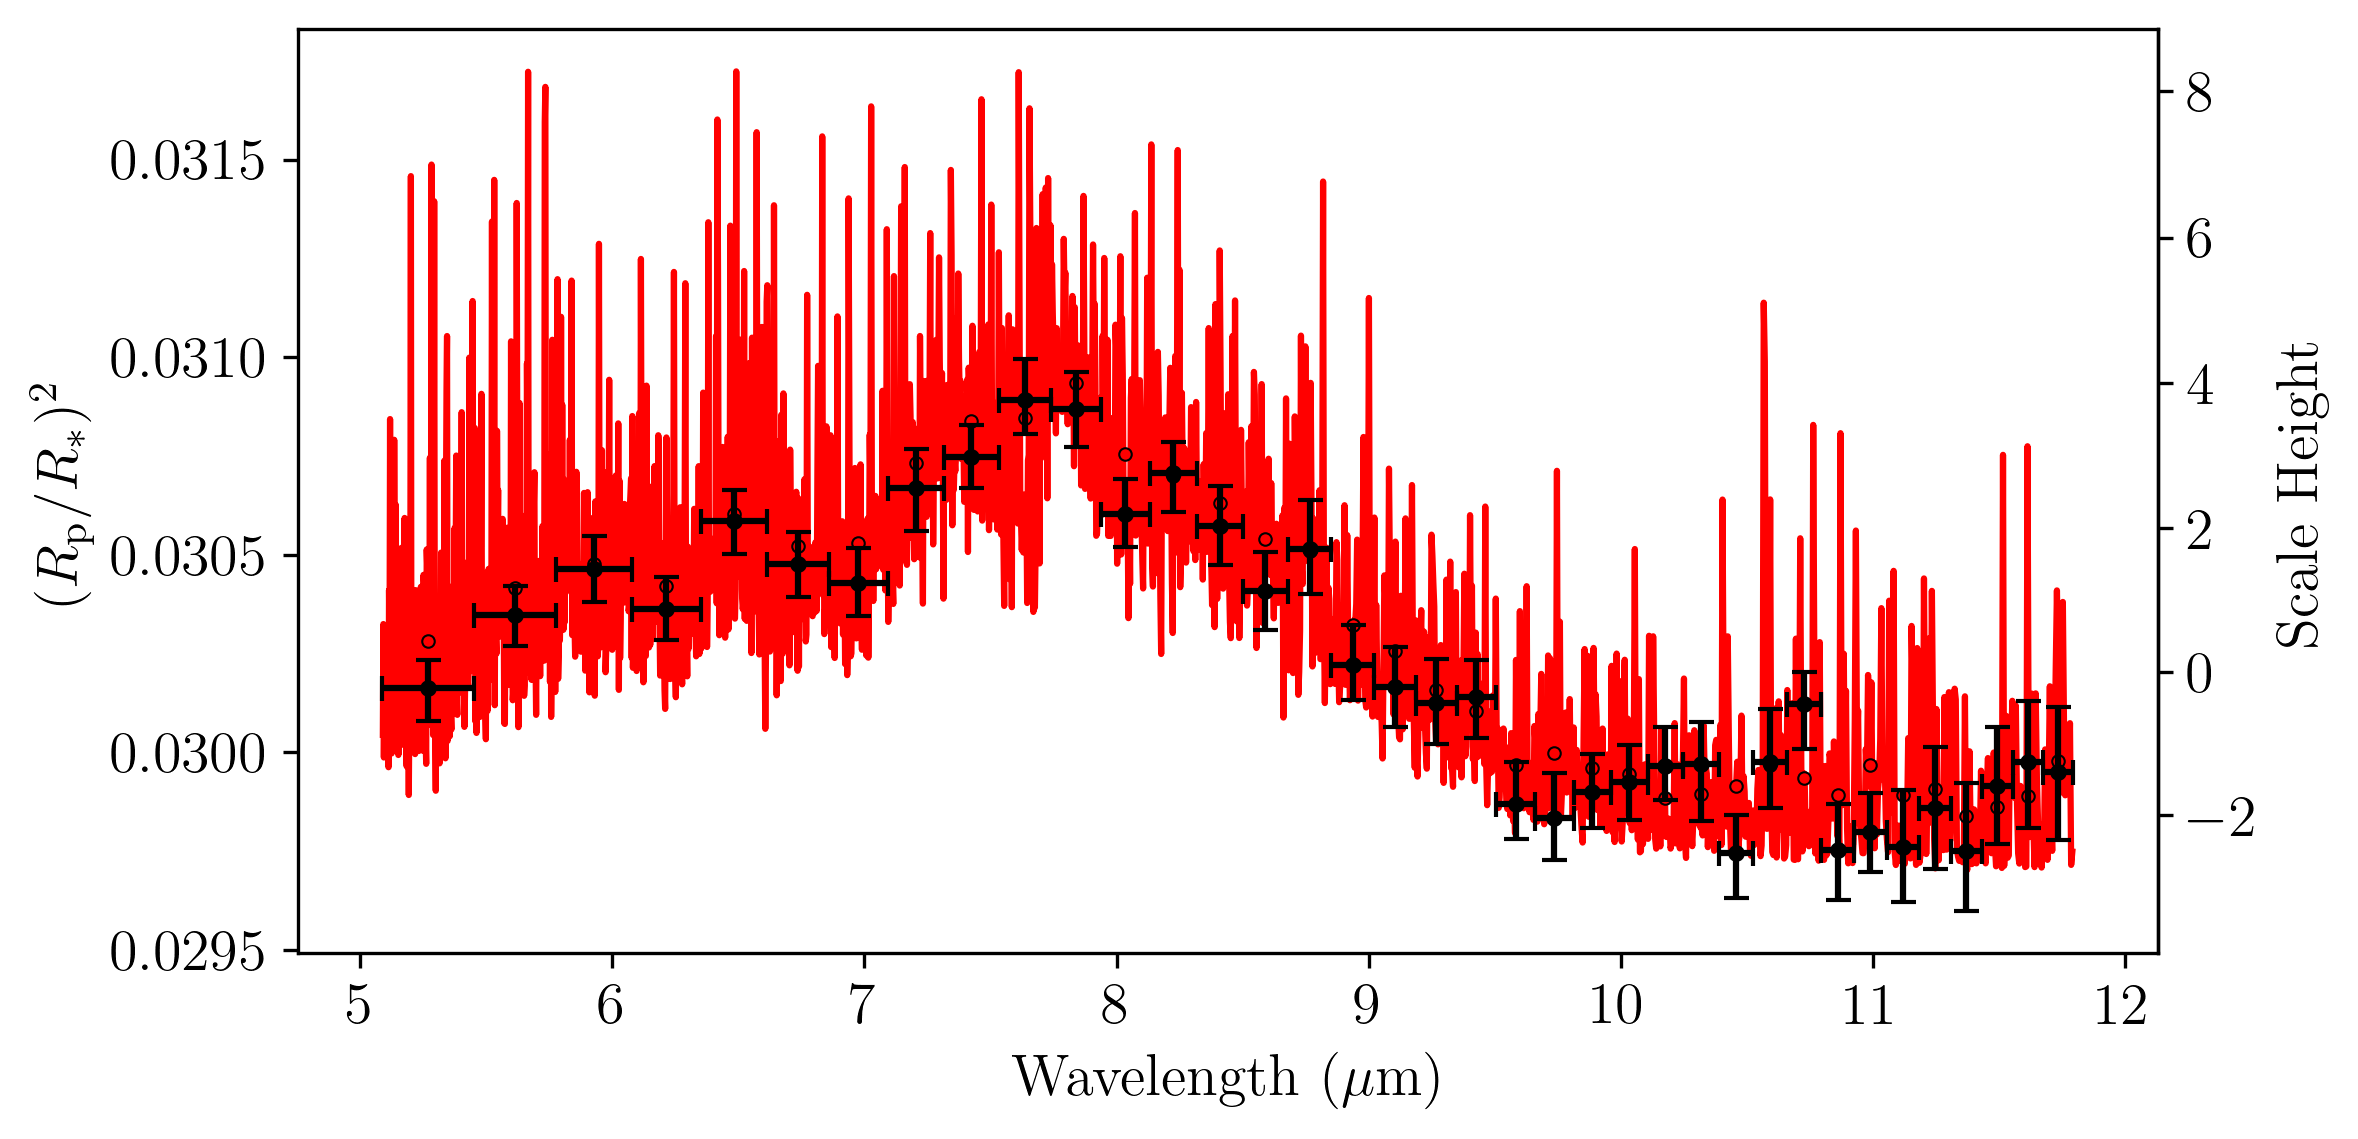 Stage 6 transmission spectrum with a second y-axis in units of atmospheric scale height.